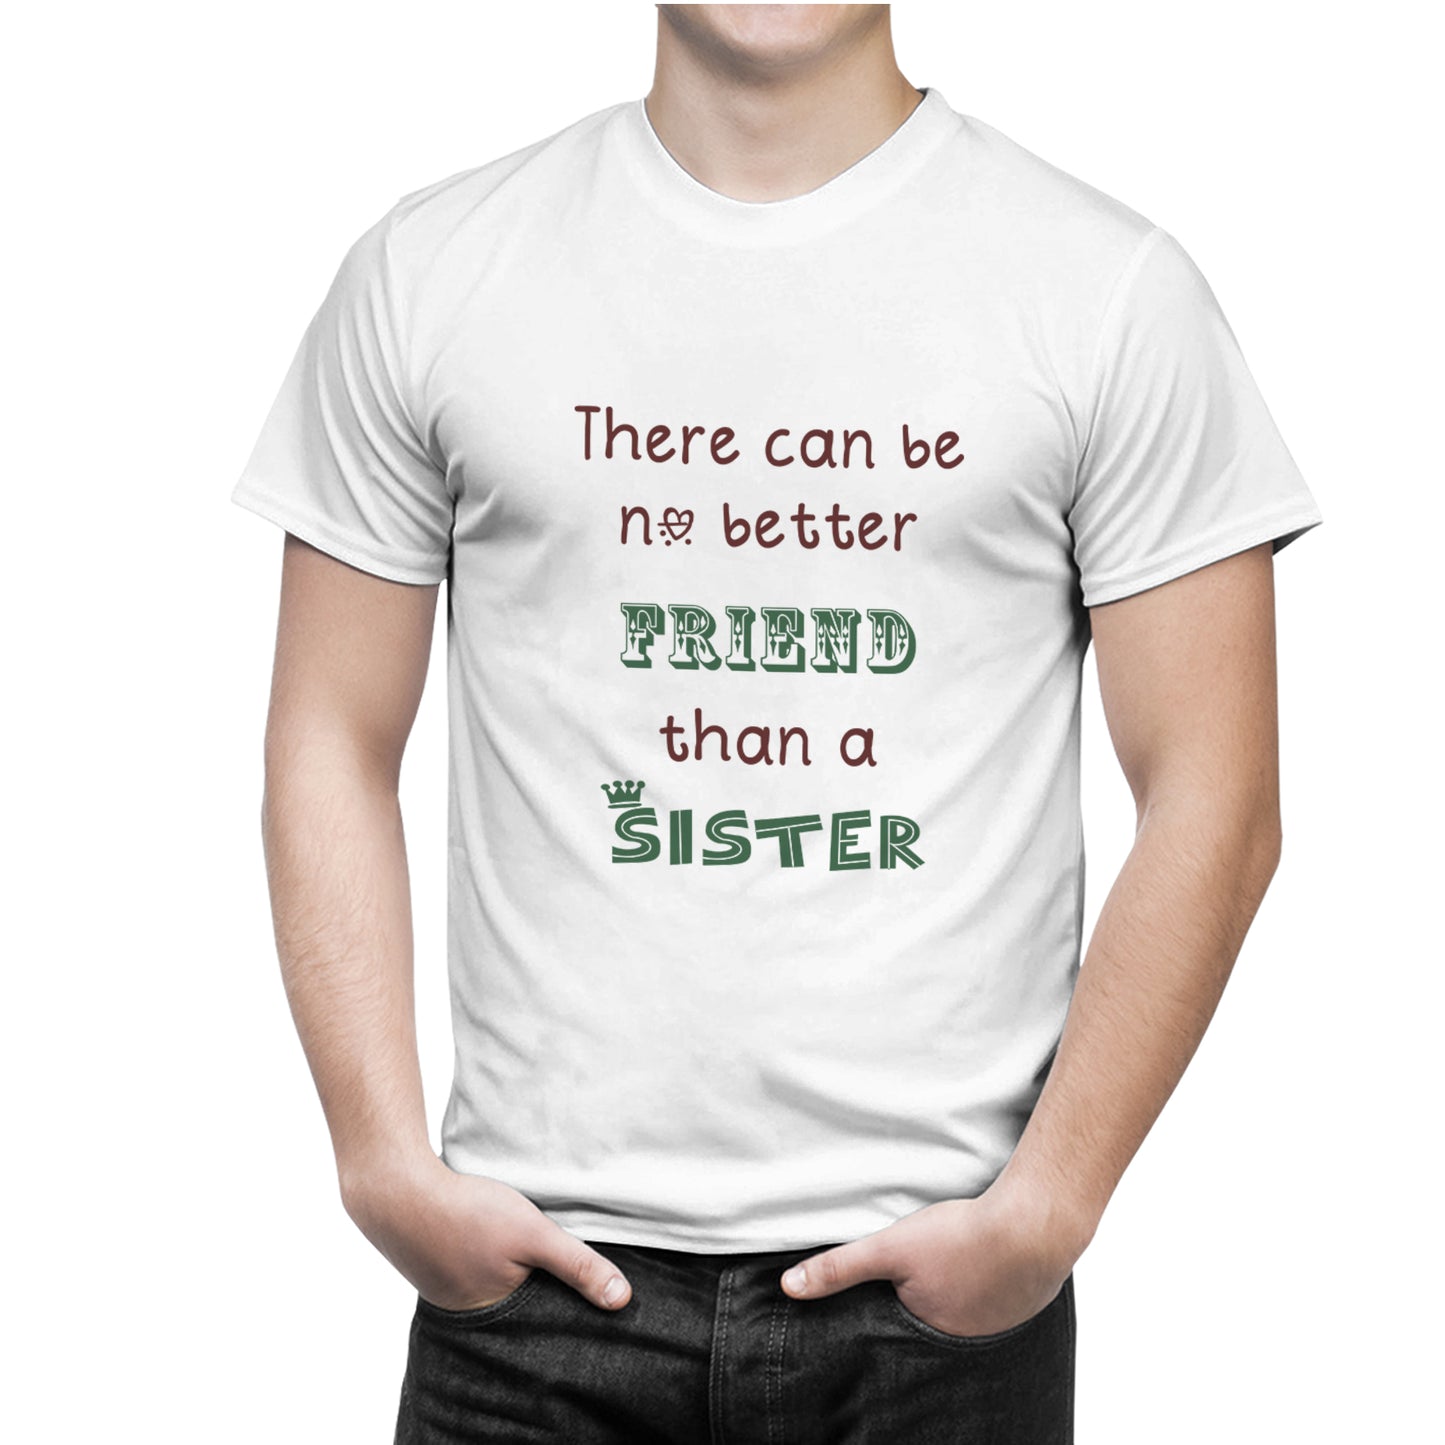 No better friend than a sister- No better Companion than a brother matching Sibling t shirts - white